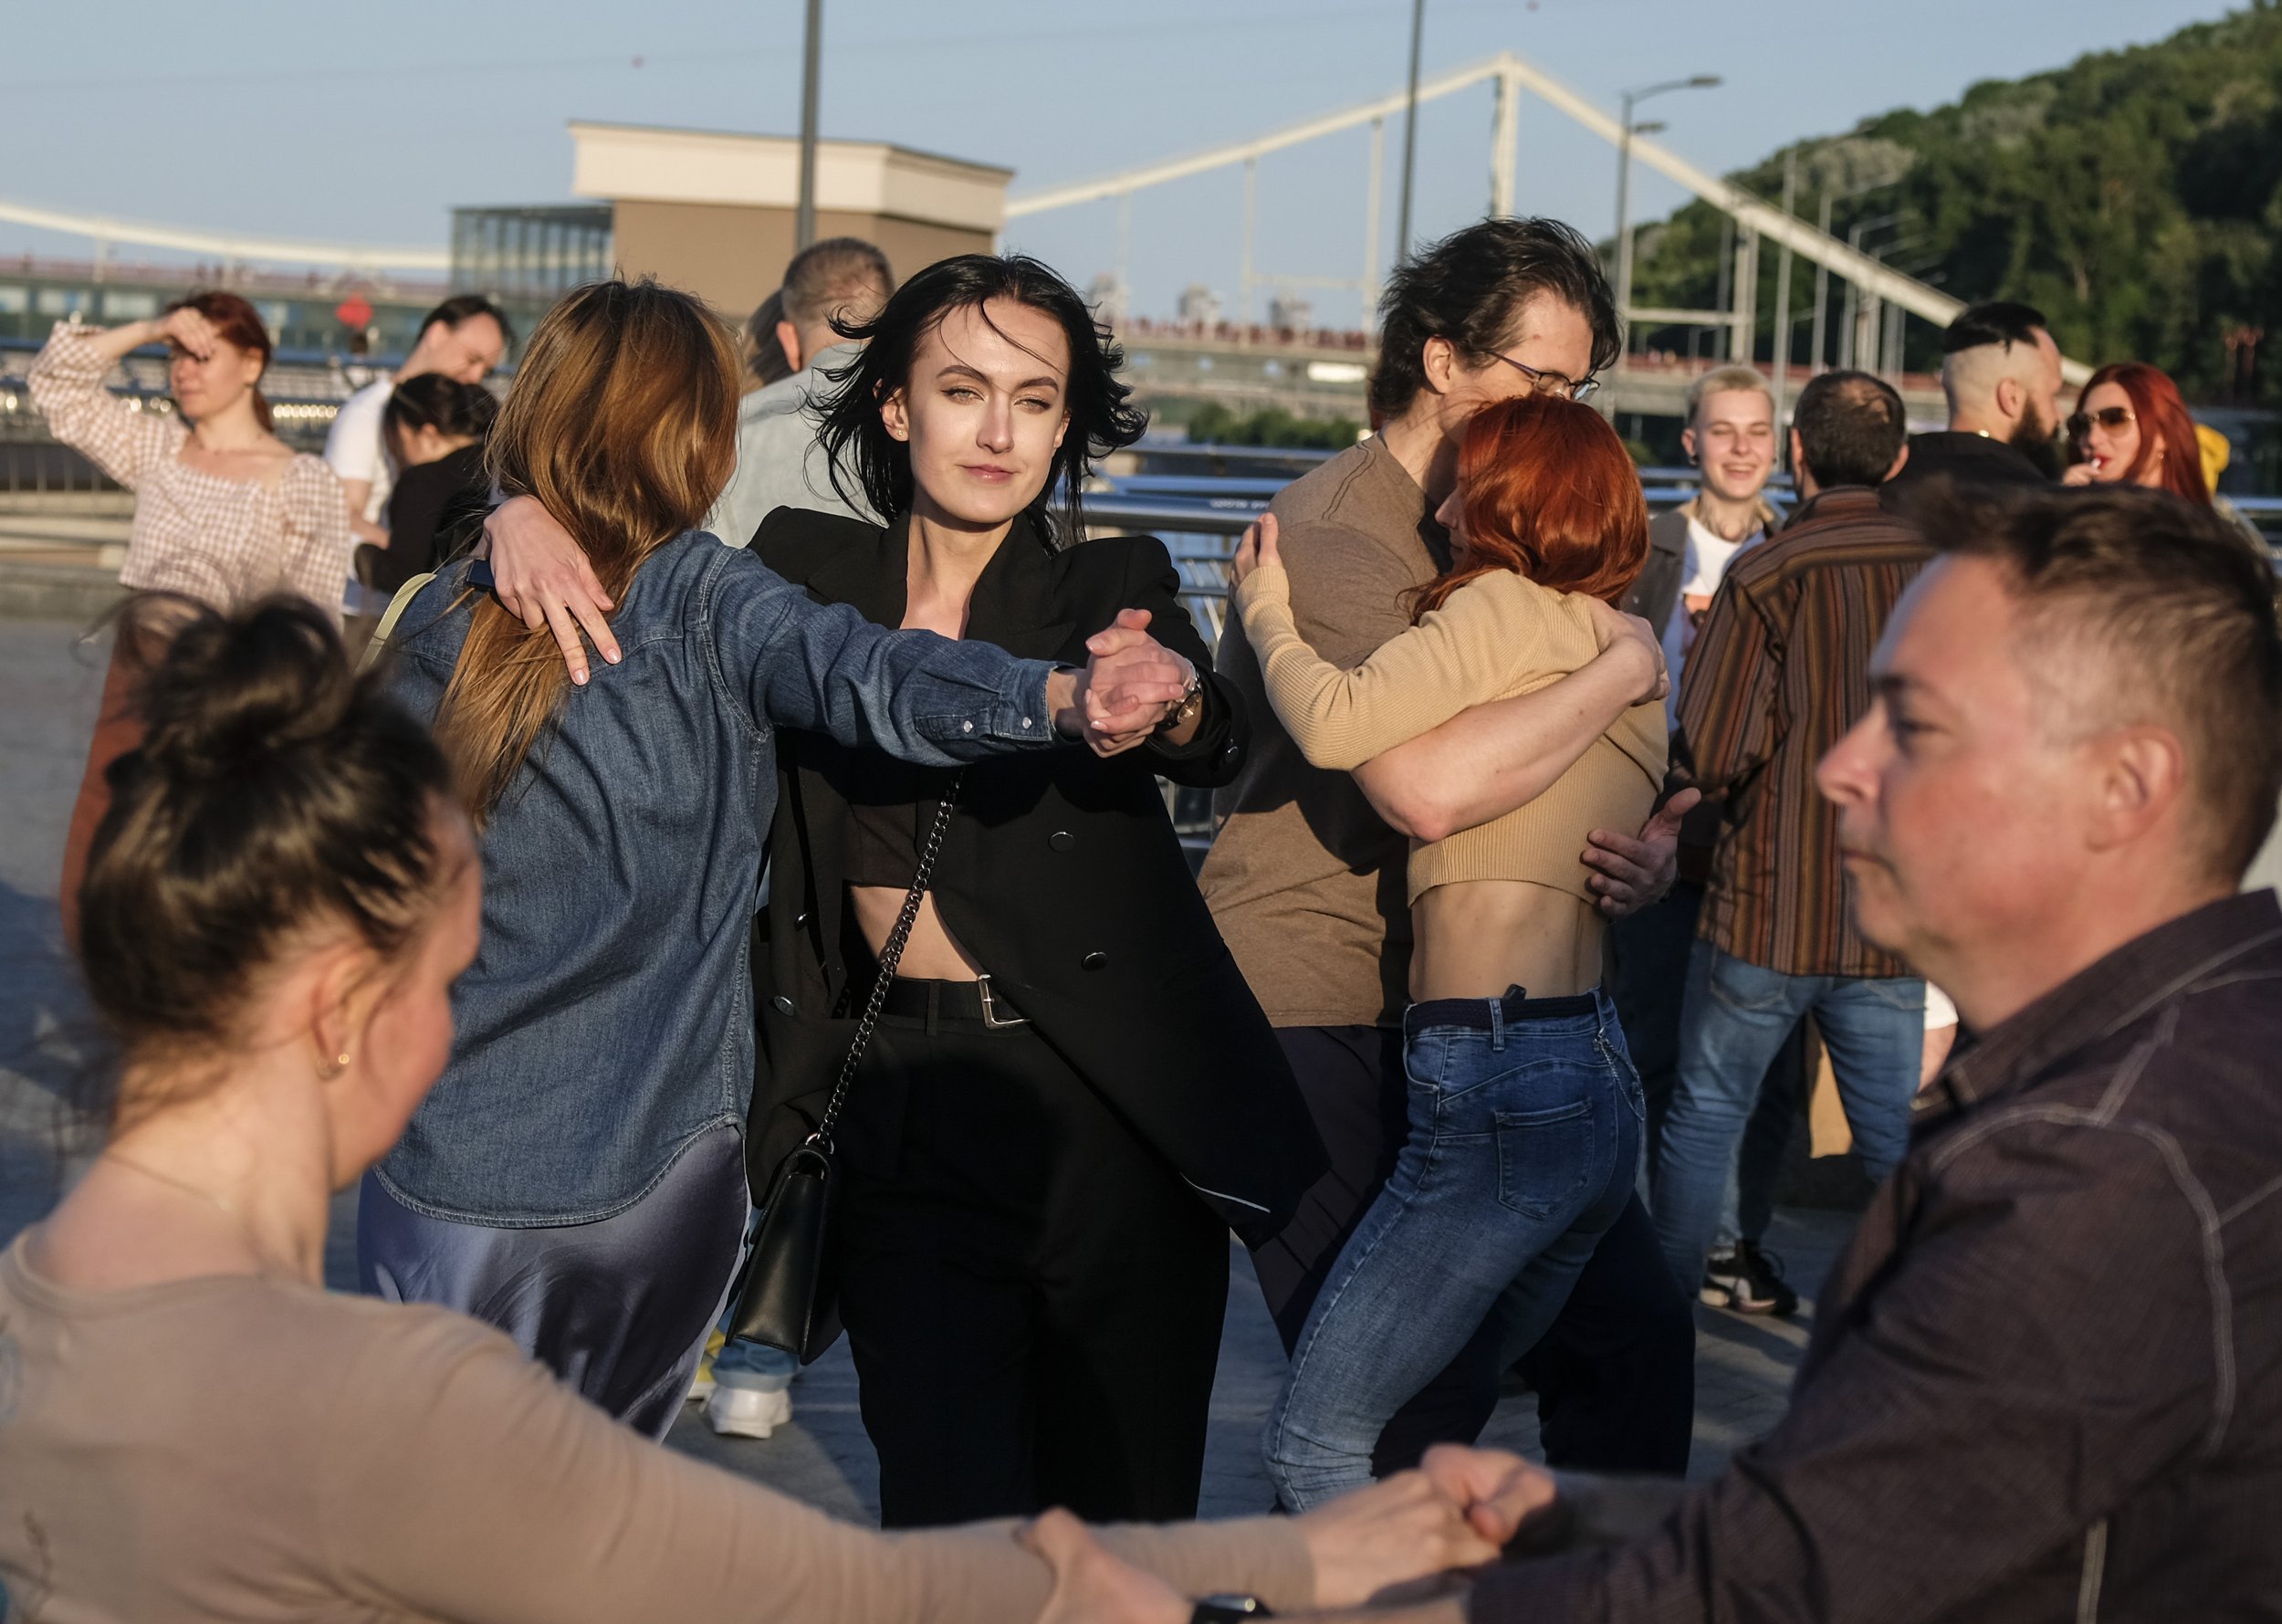  Residents of Kyiv dance during an outdoor dancing event along the Dnipro River on June 12, 2023. Ukrainians have begun to resume normal life a year after Russia’s full scale invasion despite the constant reminders of war all around. 